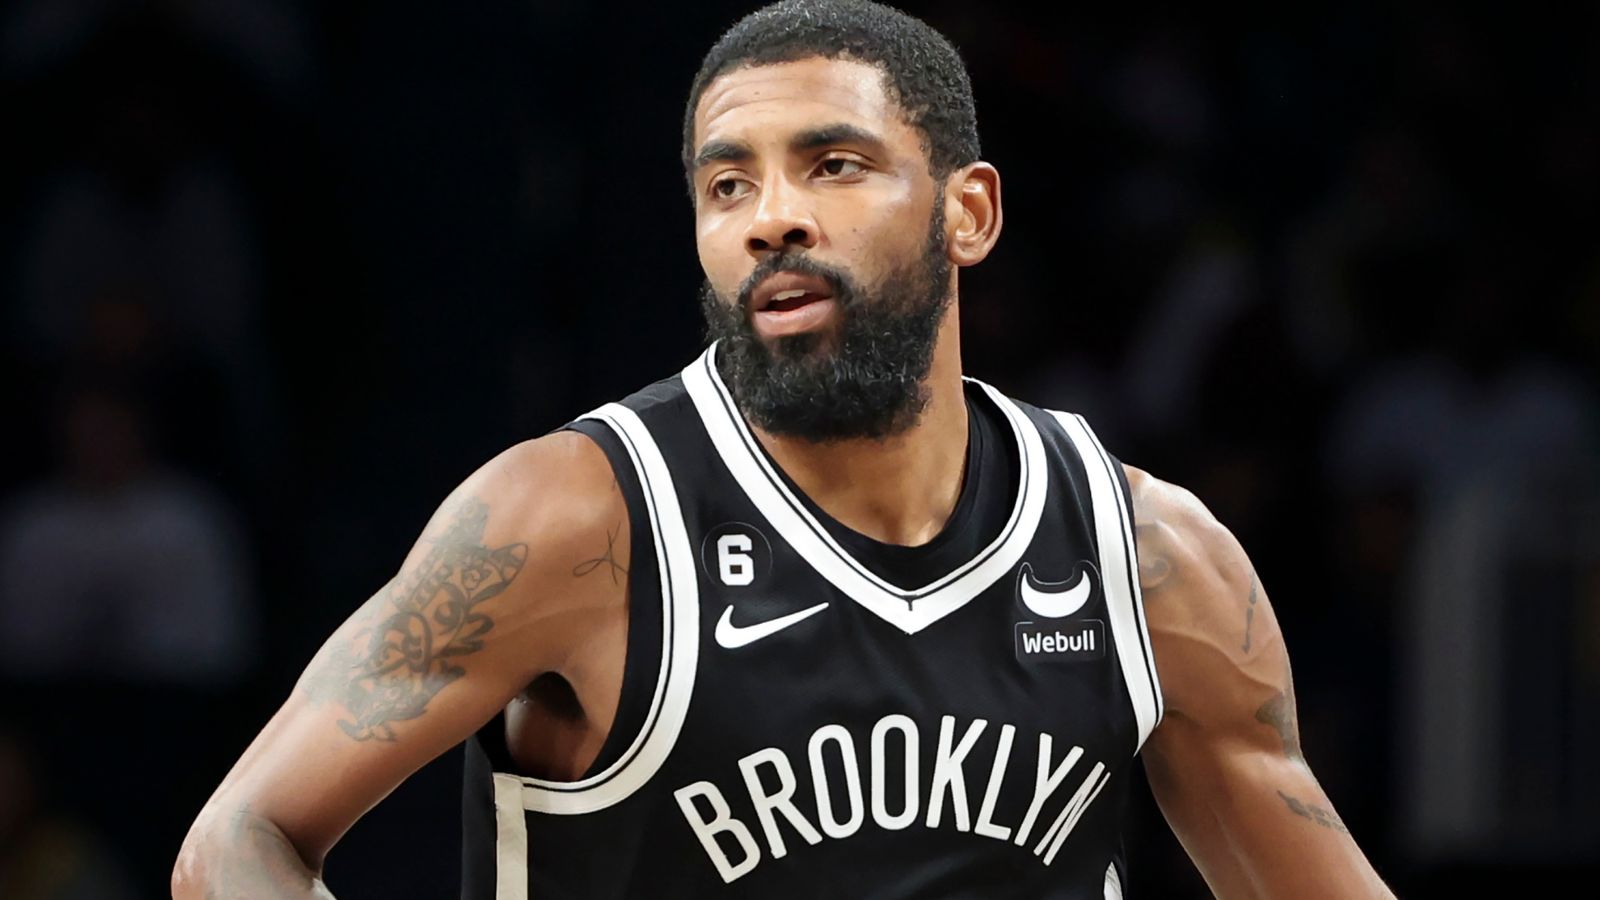 Kyrie Irving & Brooklyn Nets pledge m after anti-Semitism accusations against NBA star